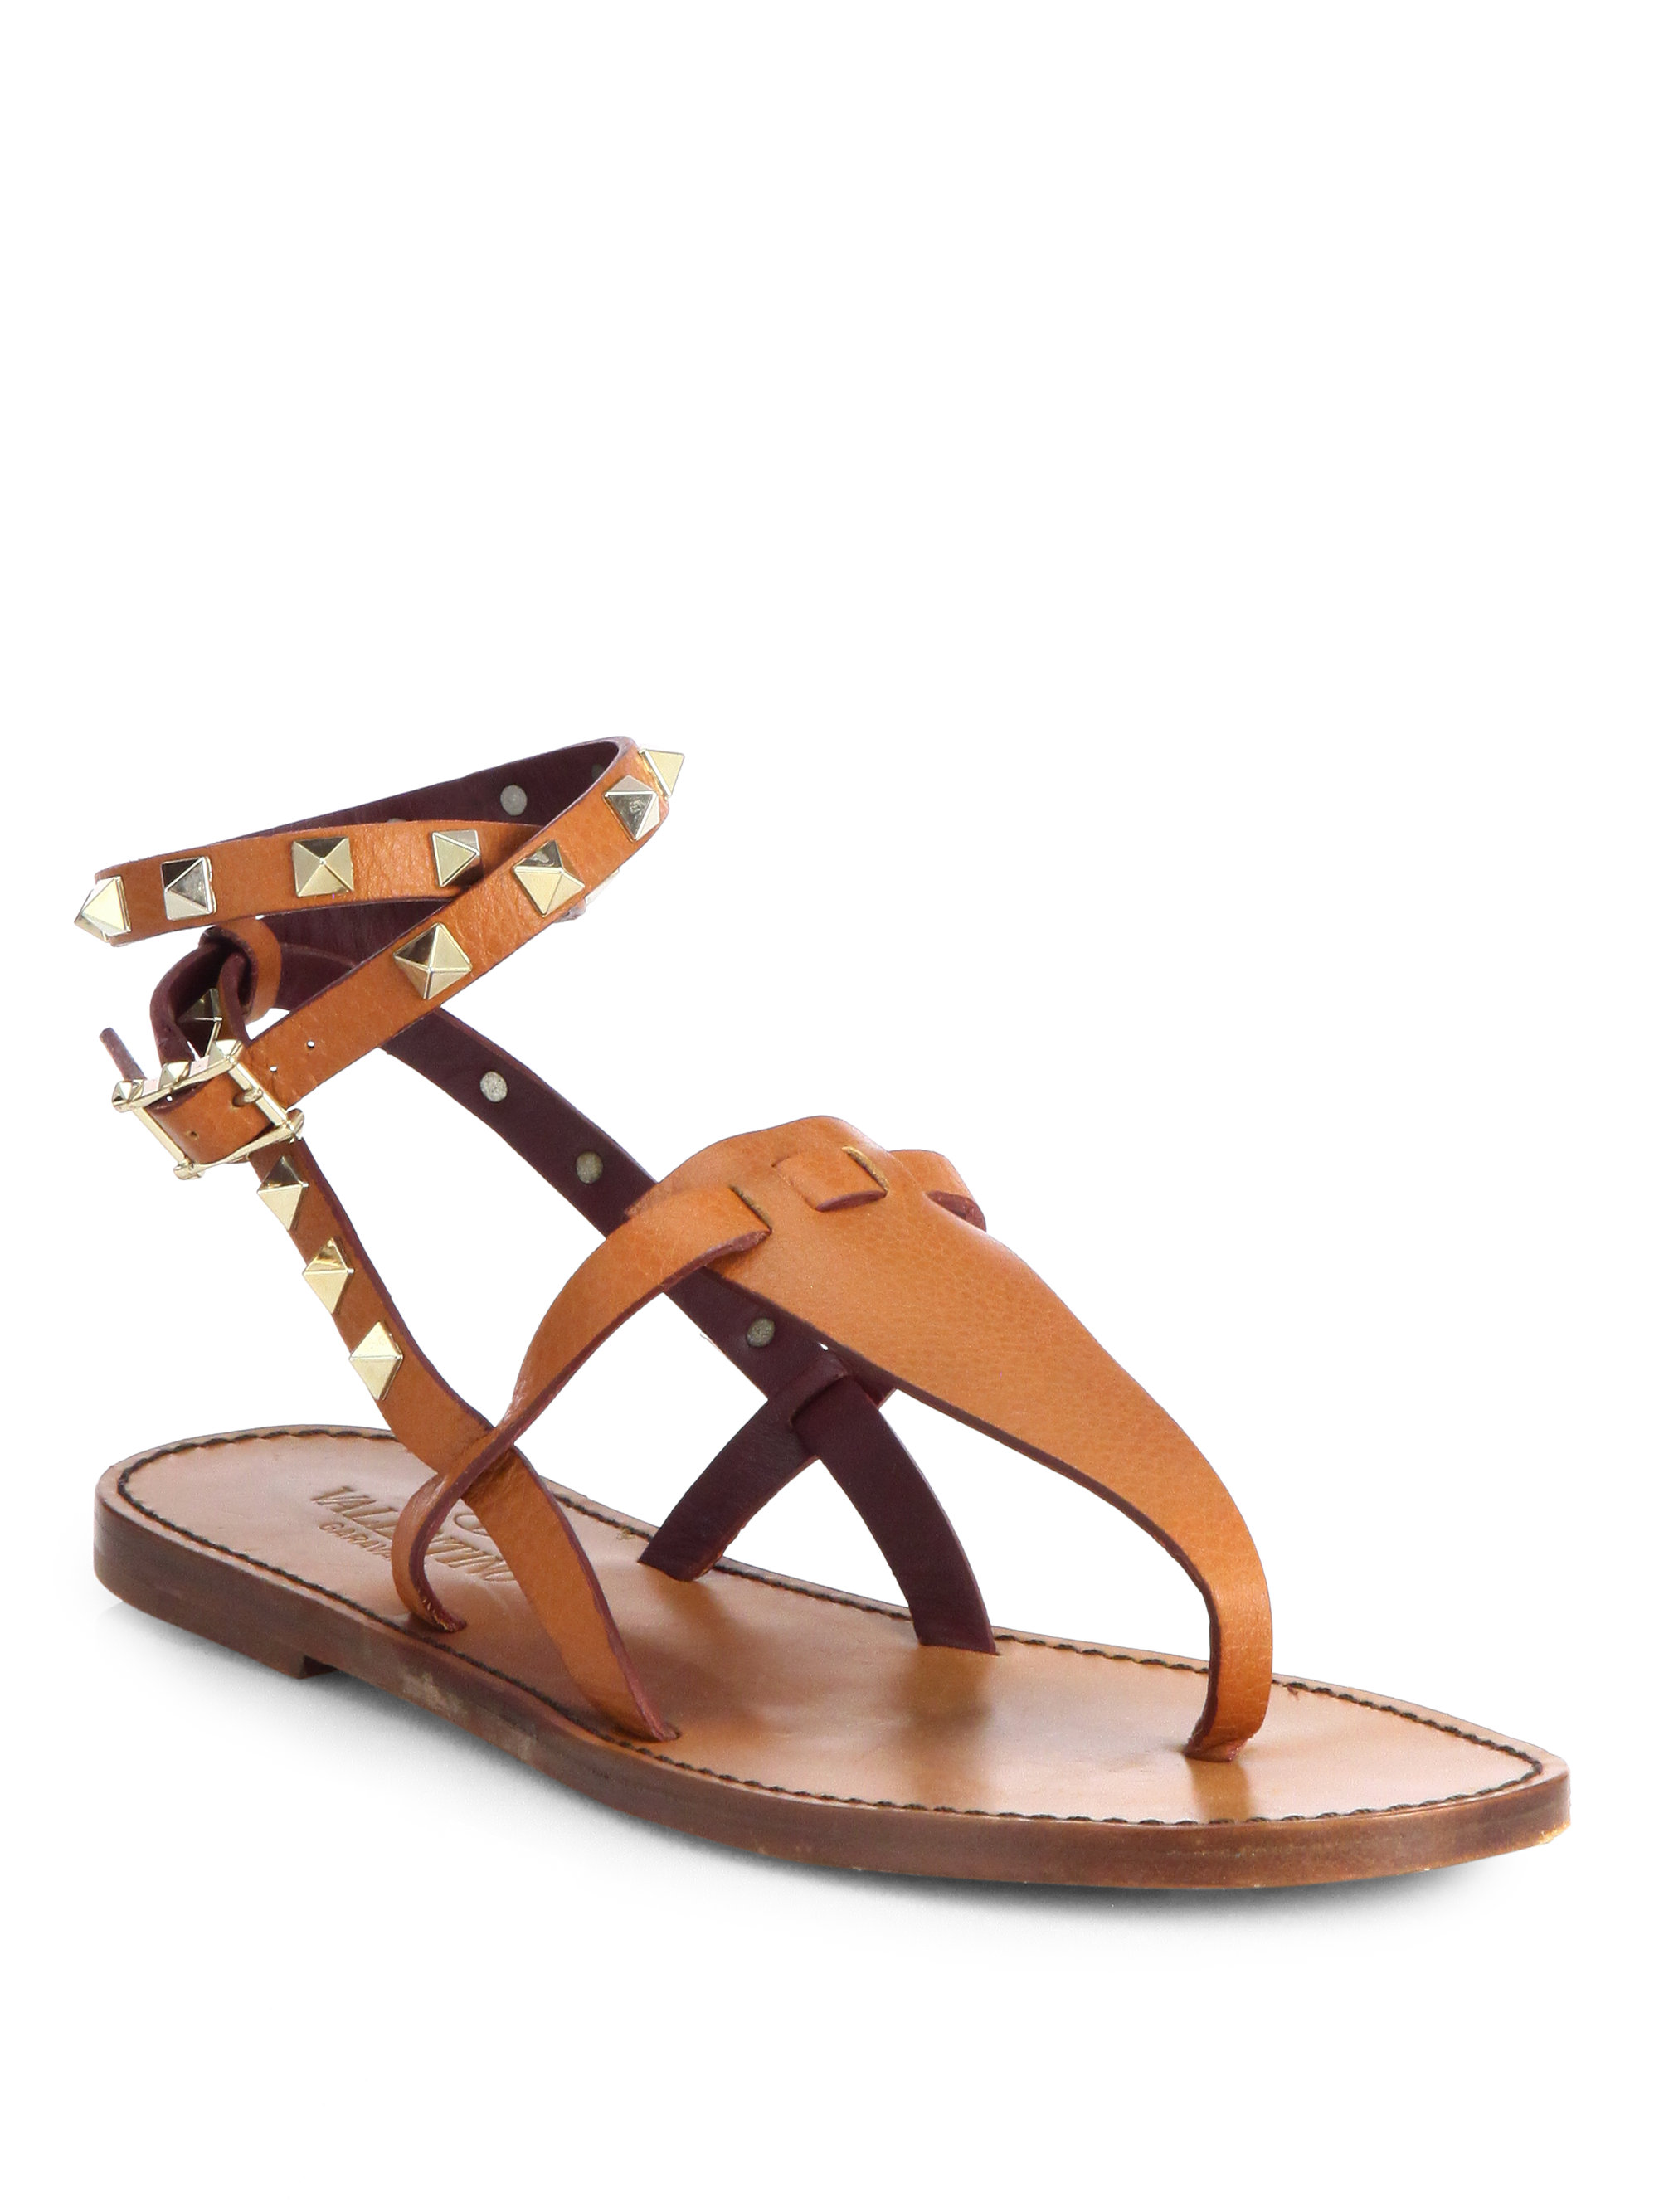 Lyst - Valentino Studded Leather Thong Sandals in Brown